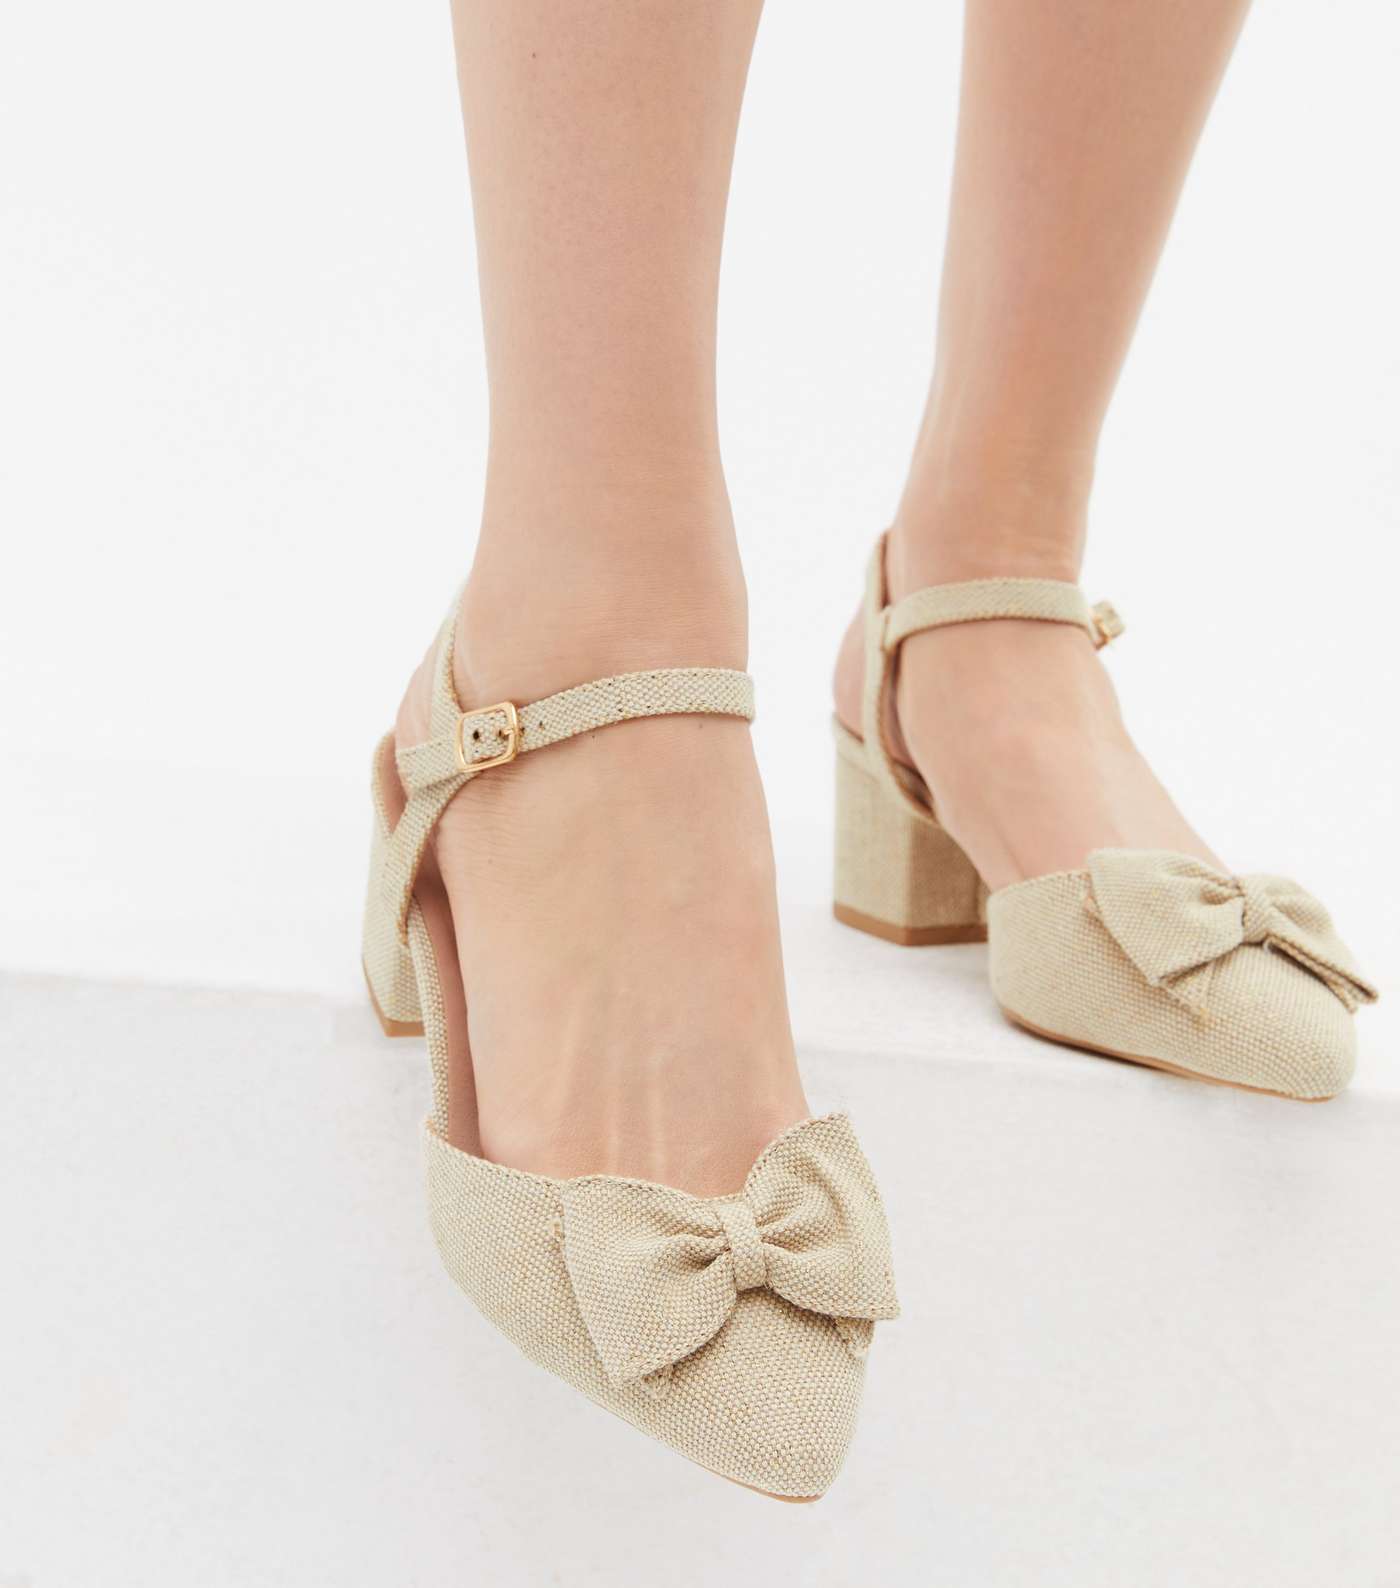 Wide Fit Off White Bow 2 Part Low Block Heel Sandals Image 2